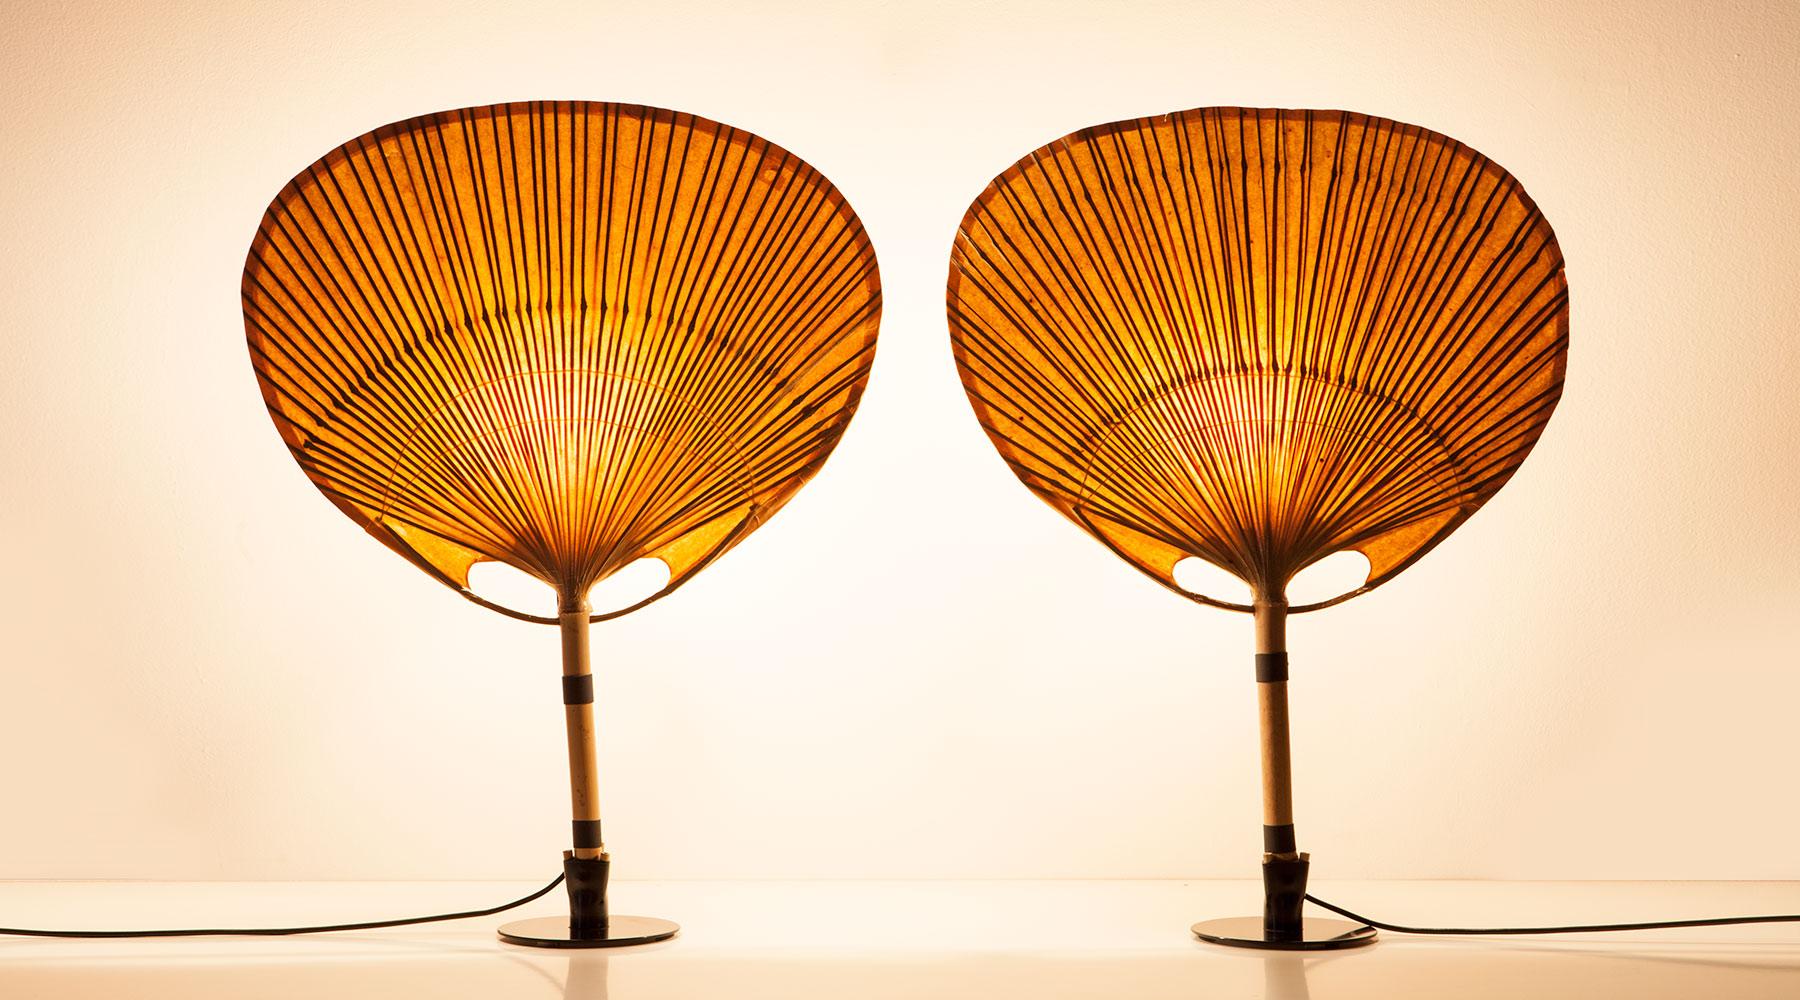 Sculptural table lamps, paper, bamboo and metal details, Germany, 1973.

Delicate 1970s bamboo and paper table lamps by Ingo Maurer. The beautiful construction is held by more solid metal feet, contrasting the light feel of the upper part.